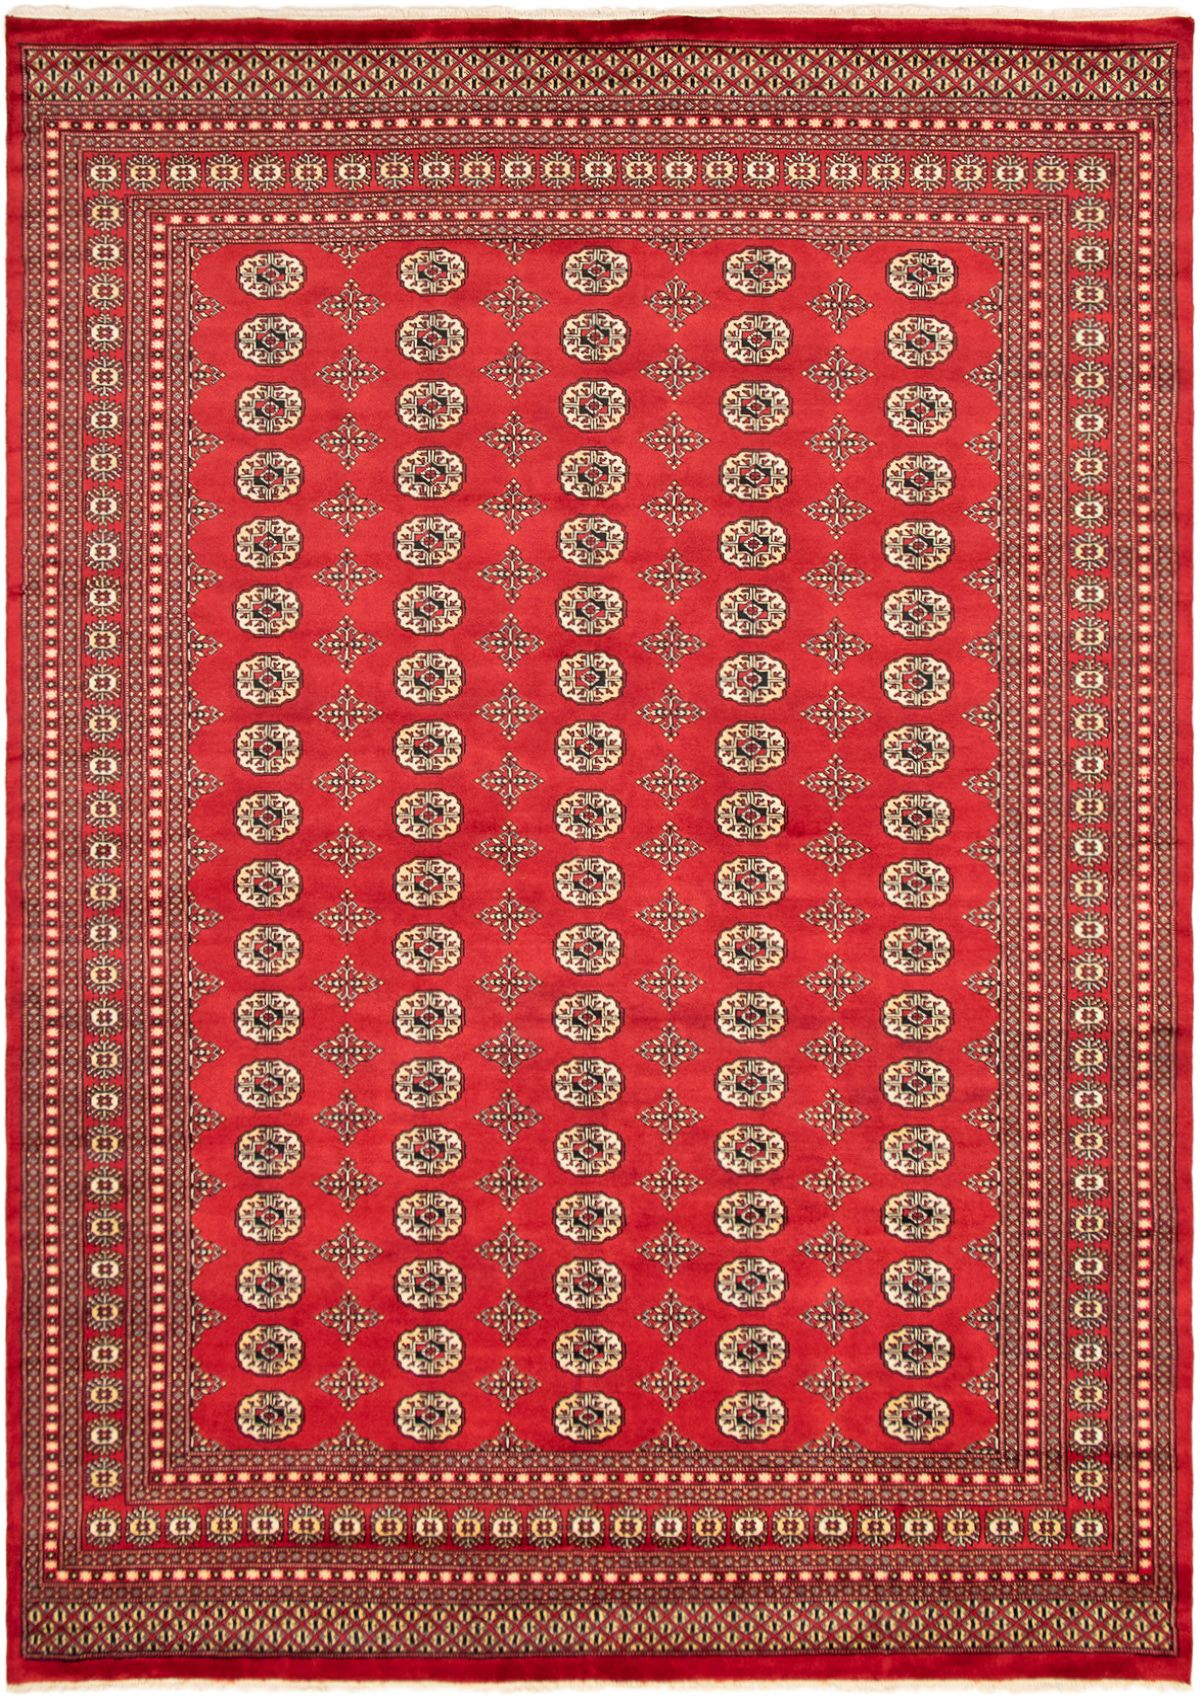 Hand-knotted Finest Peshawar Bokhara Red Wool Rug 8'0" x 11'0" Size: 8'0" x 11'0"  